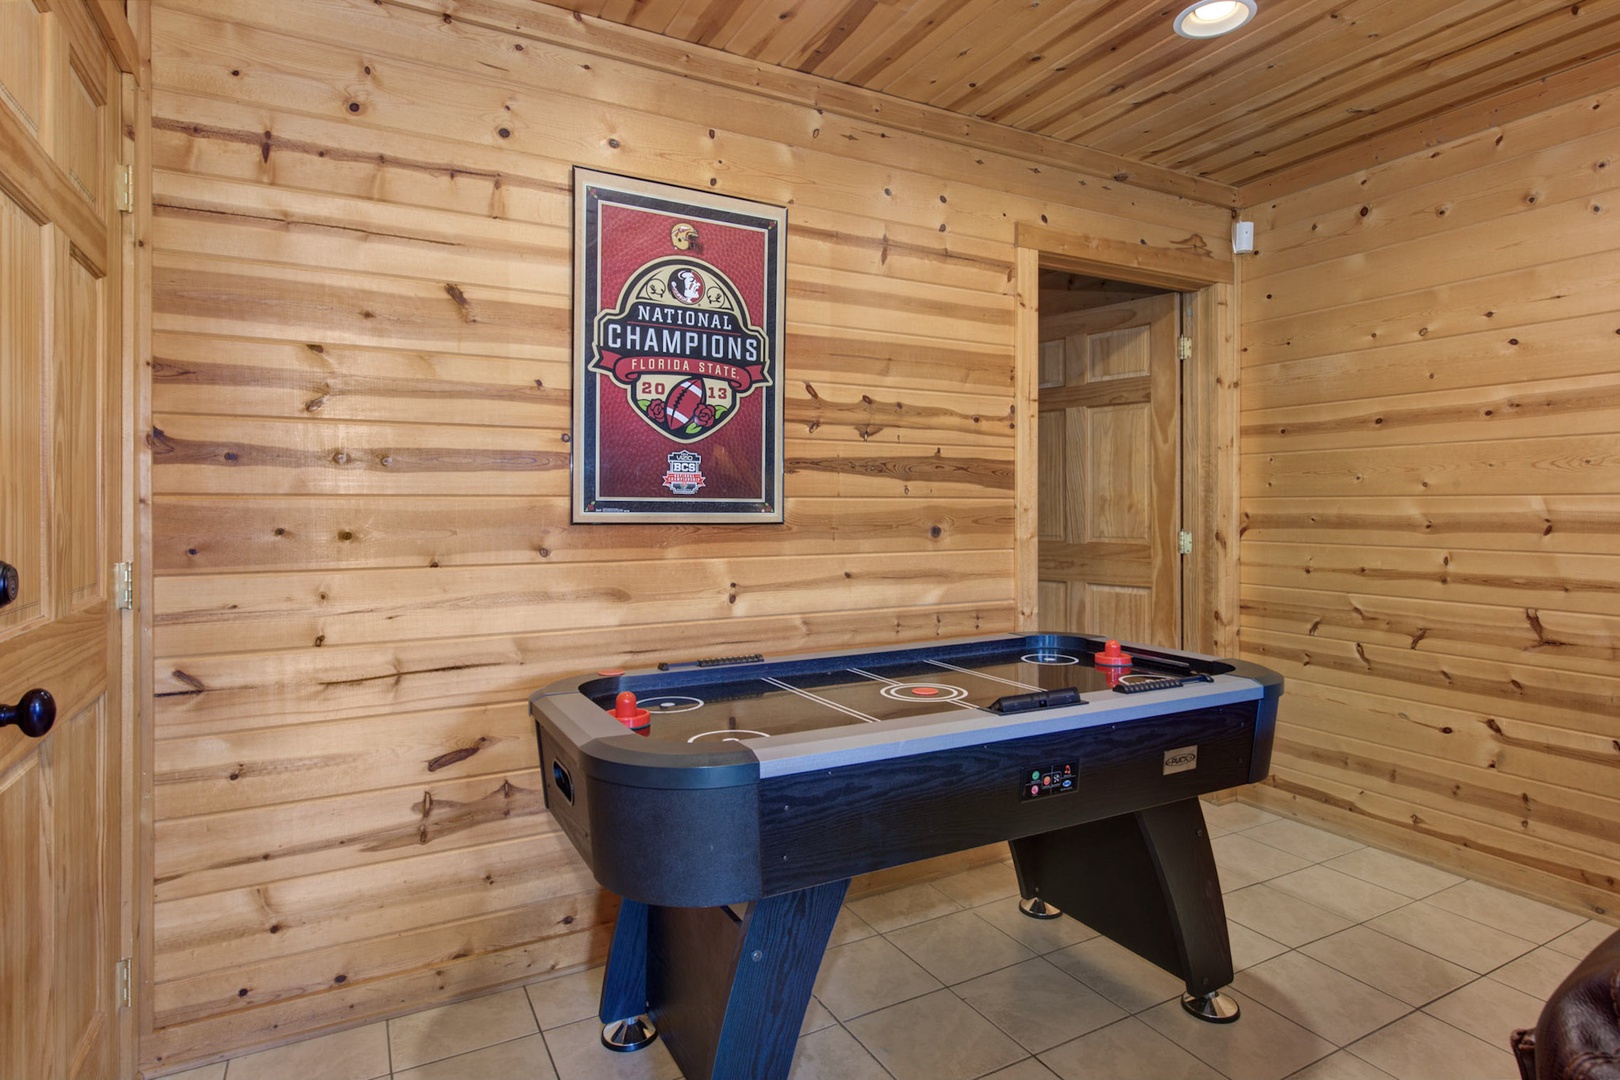 The game room retreat features a pool table, air hockey, sleeper sofa, & TV